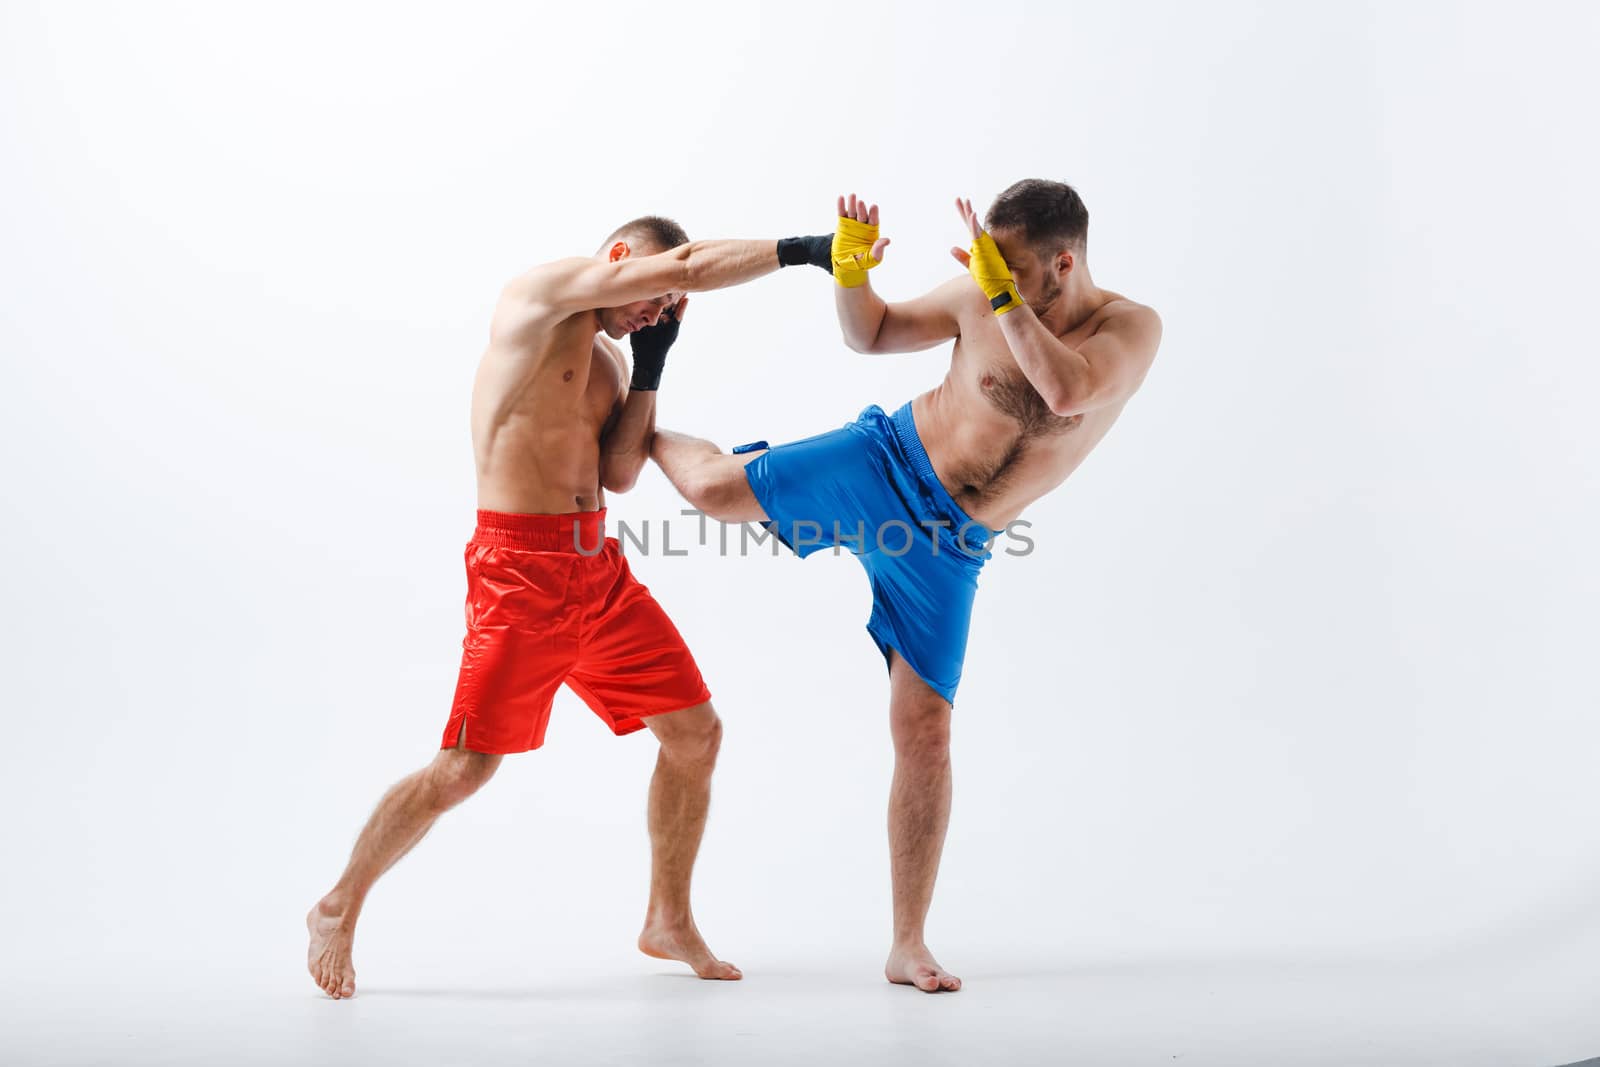 Two men boxers fighting muay thai boxing white background.